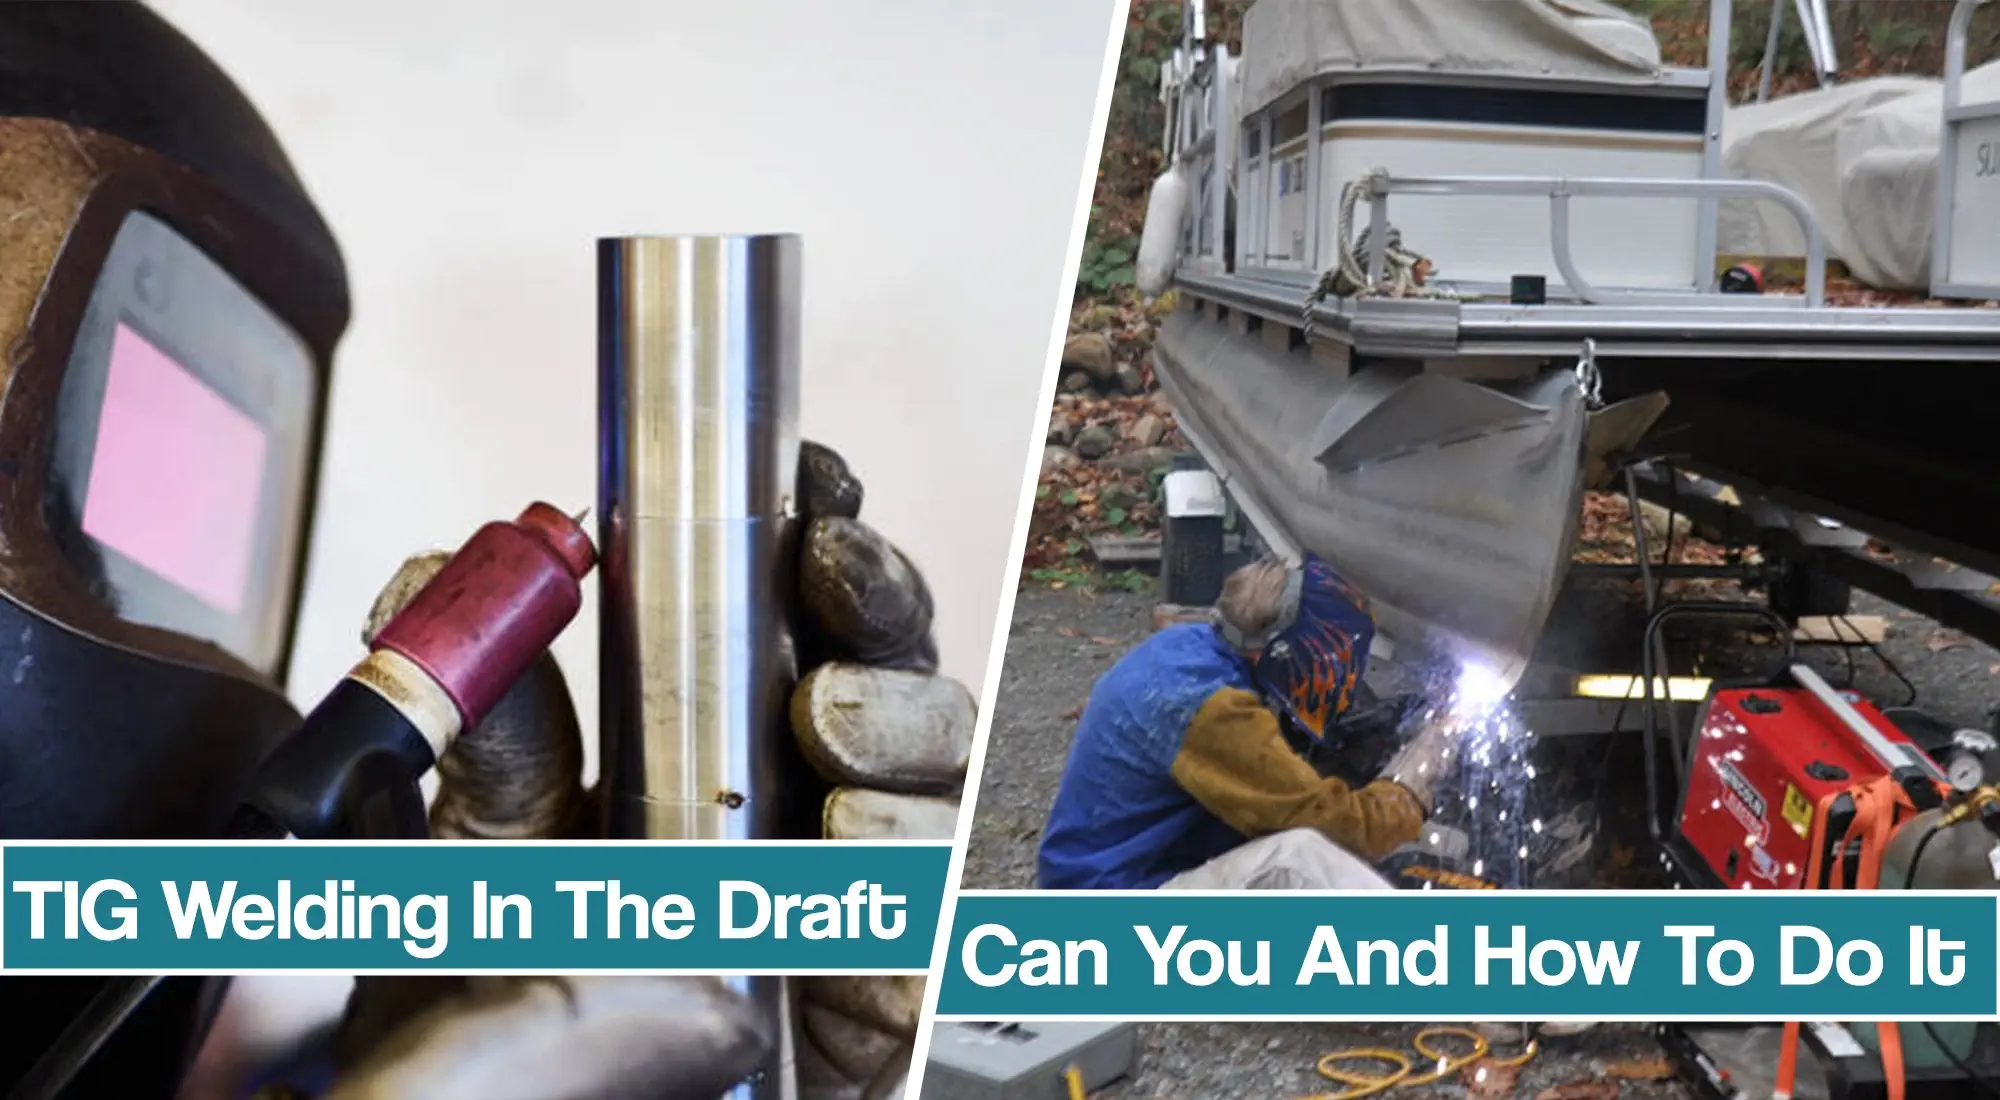 TIG Welding Outdoors – Is it safe & Can You to do it